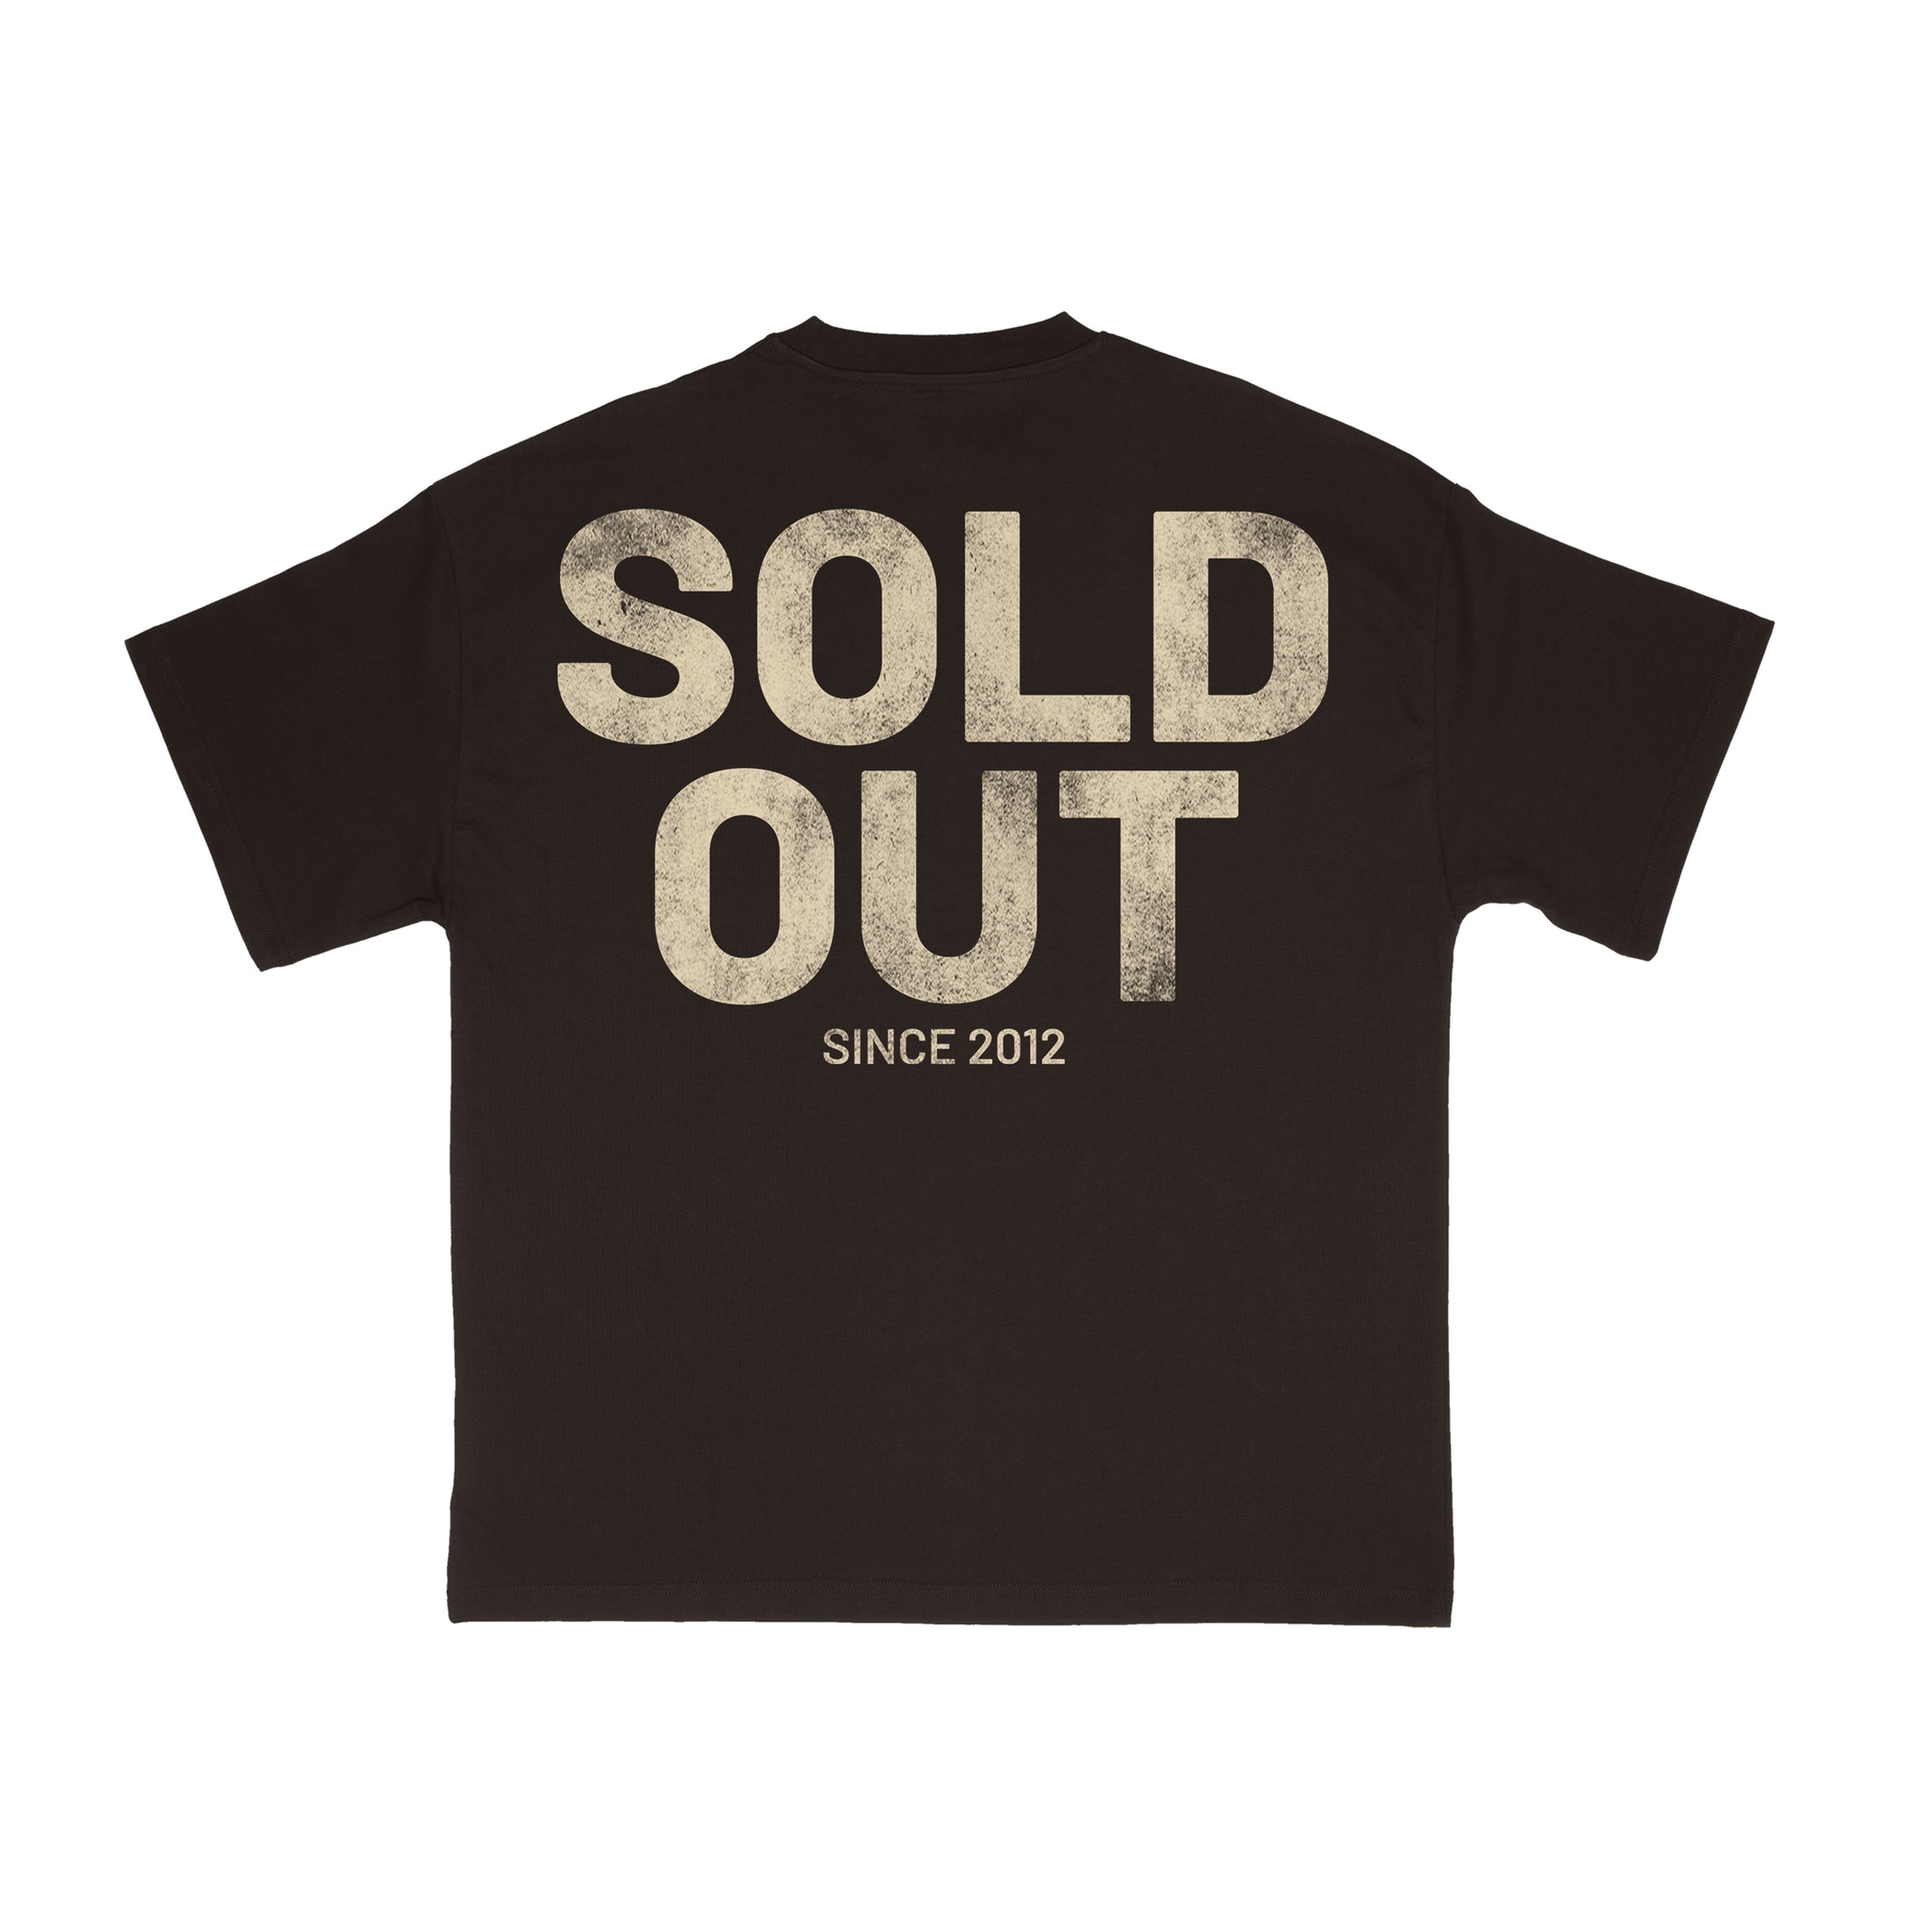 SOLD OUT (Chocolate/Cream)